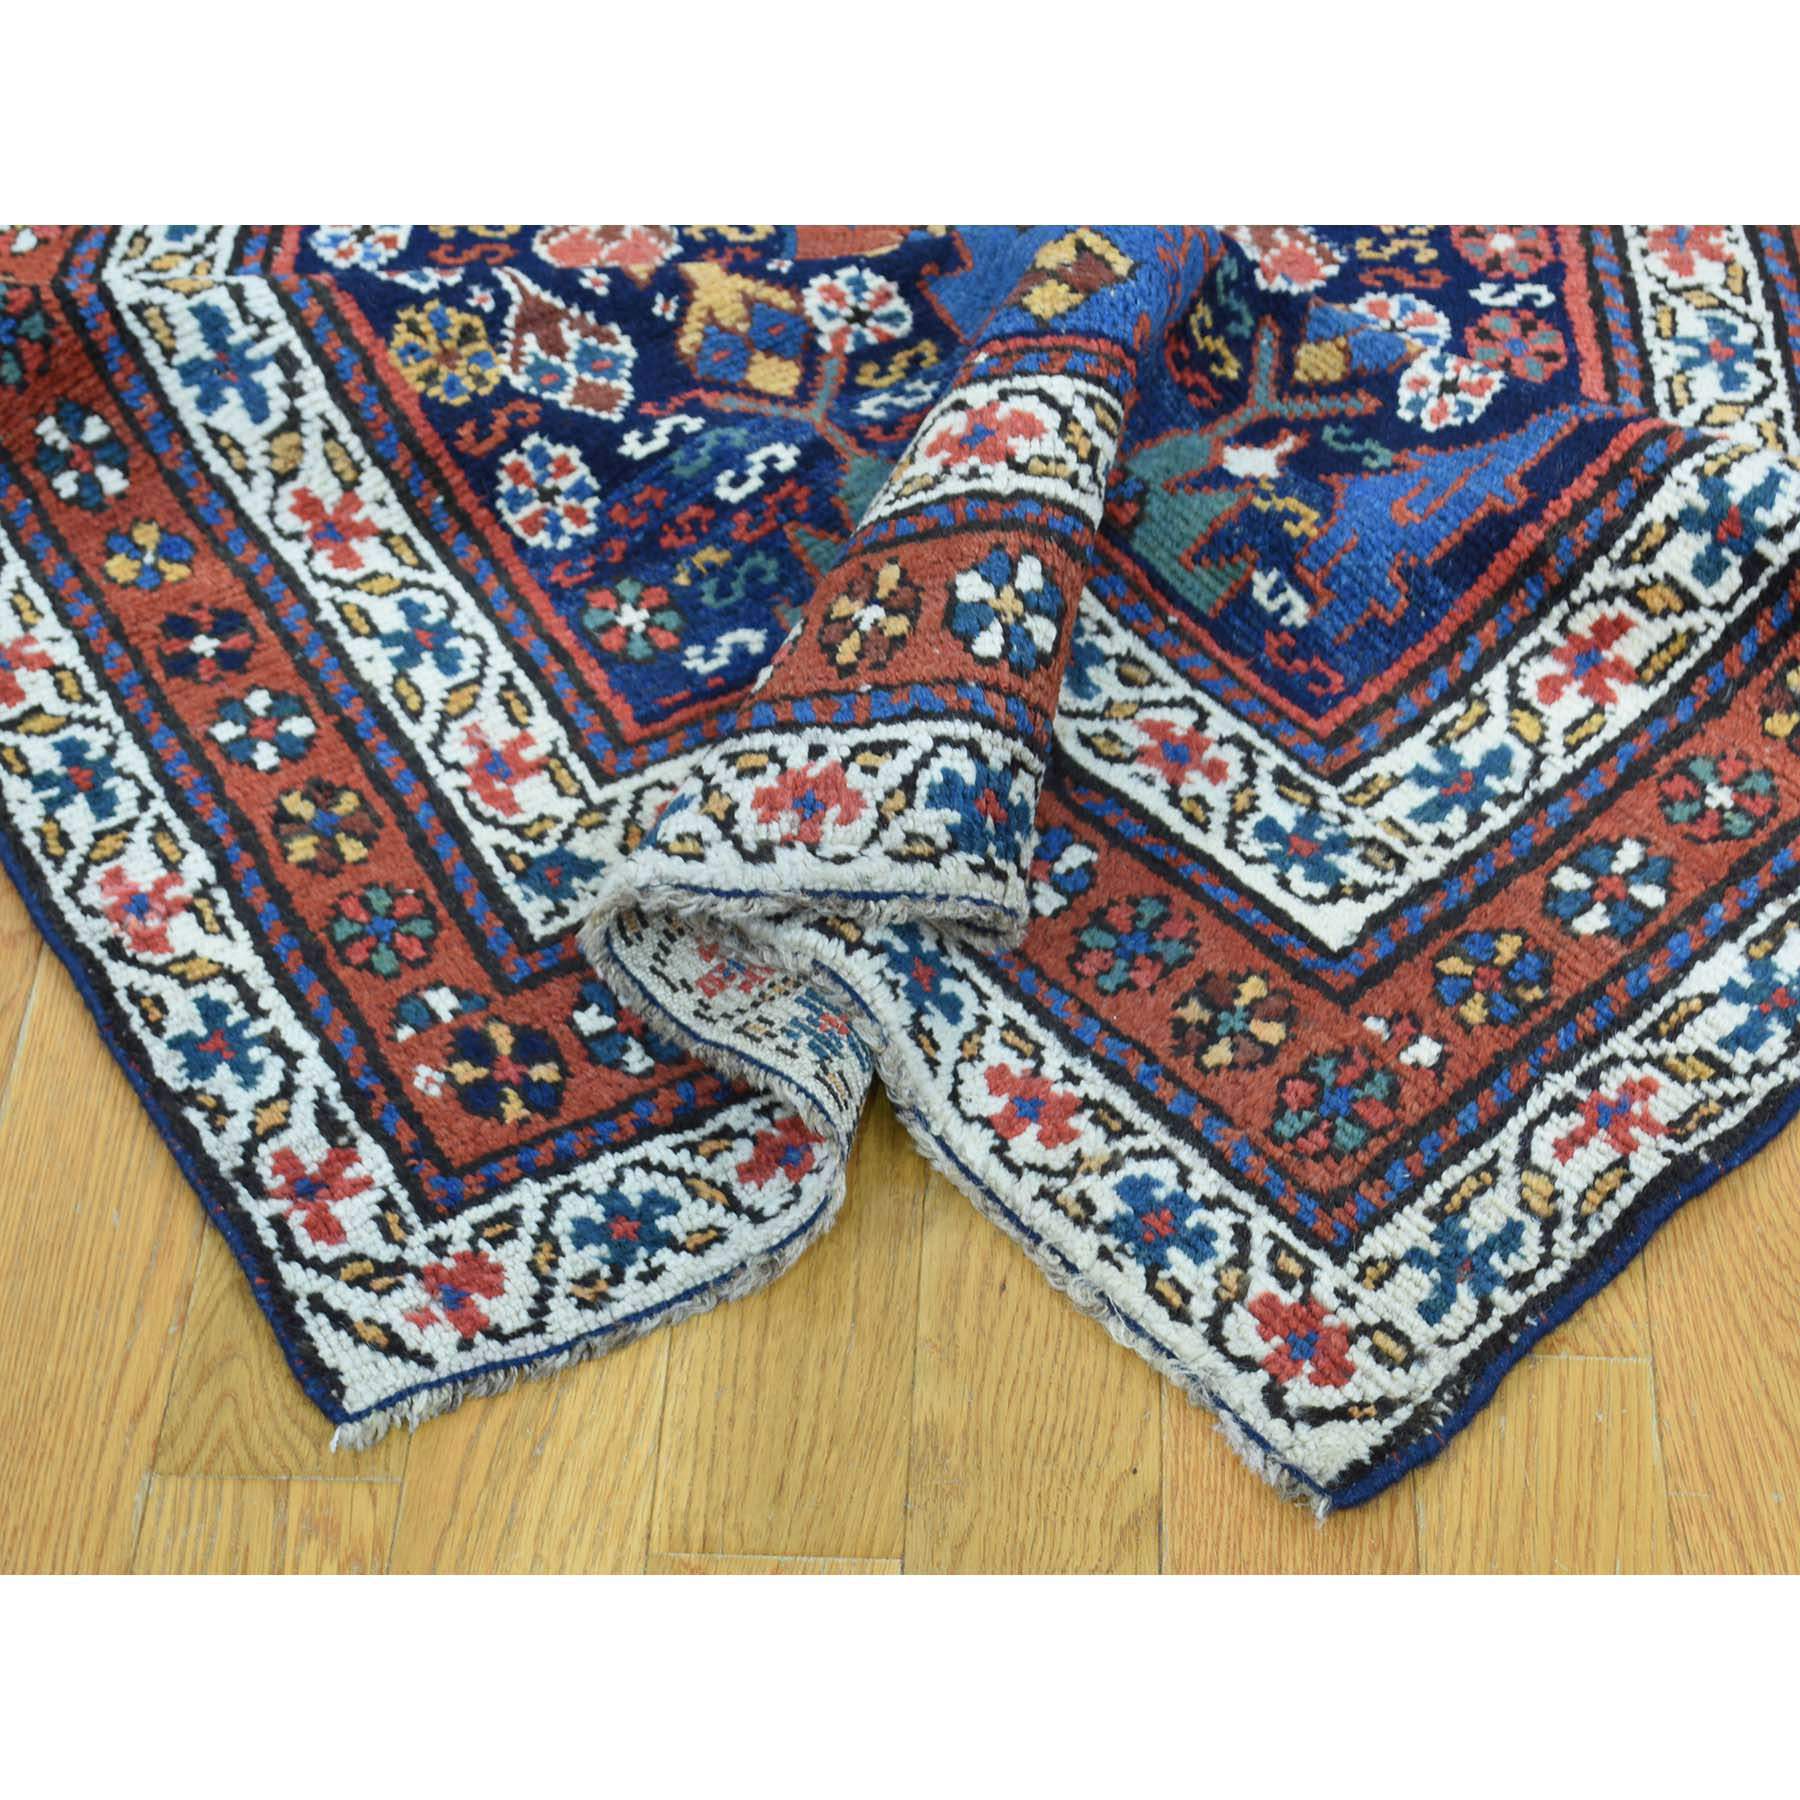 3'5"x12'9" Full Pile Antique Mint Condition Northwest Persian Wide Runner 